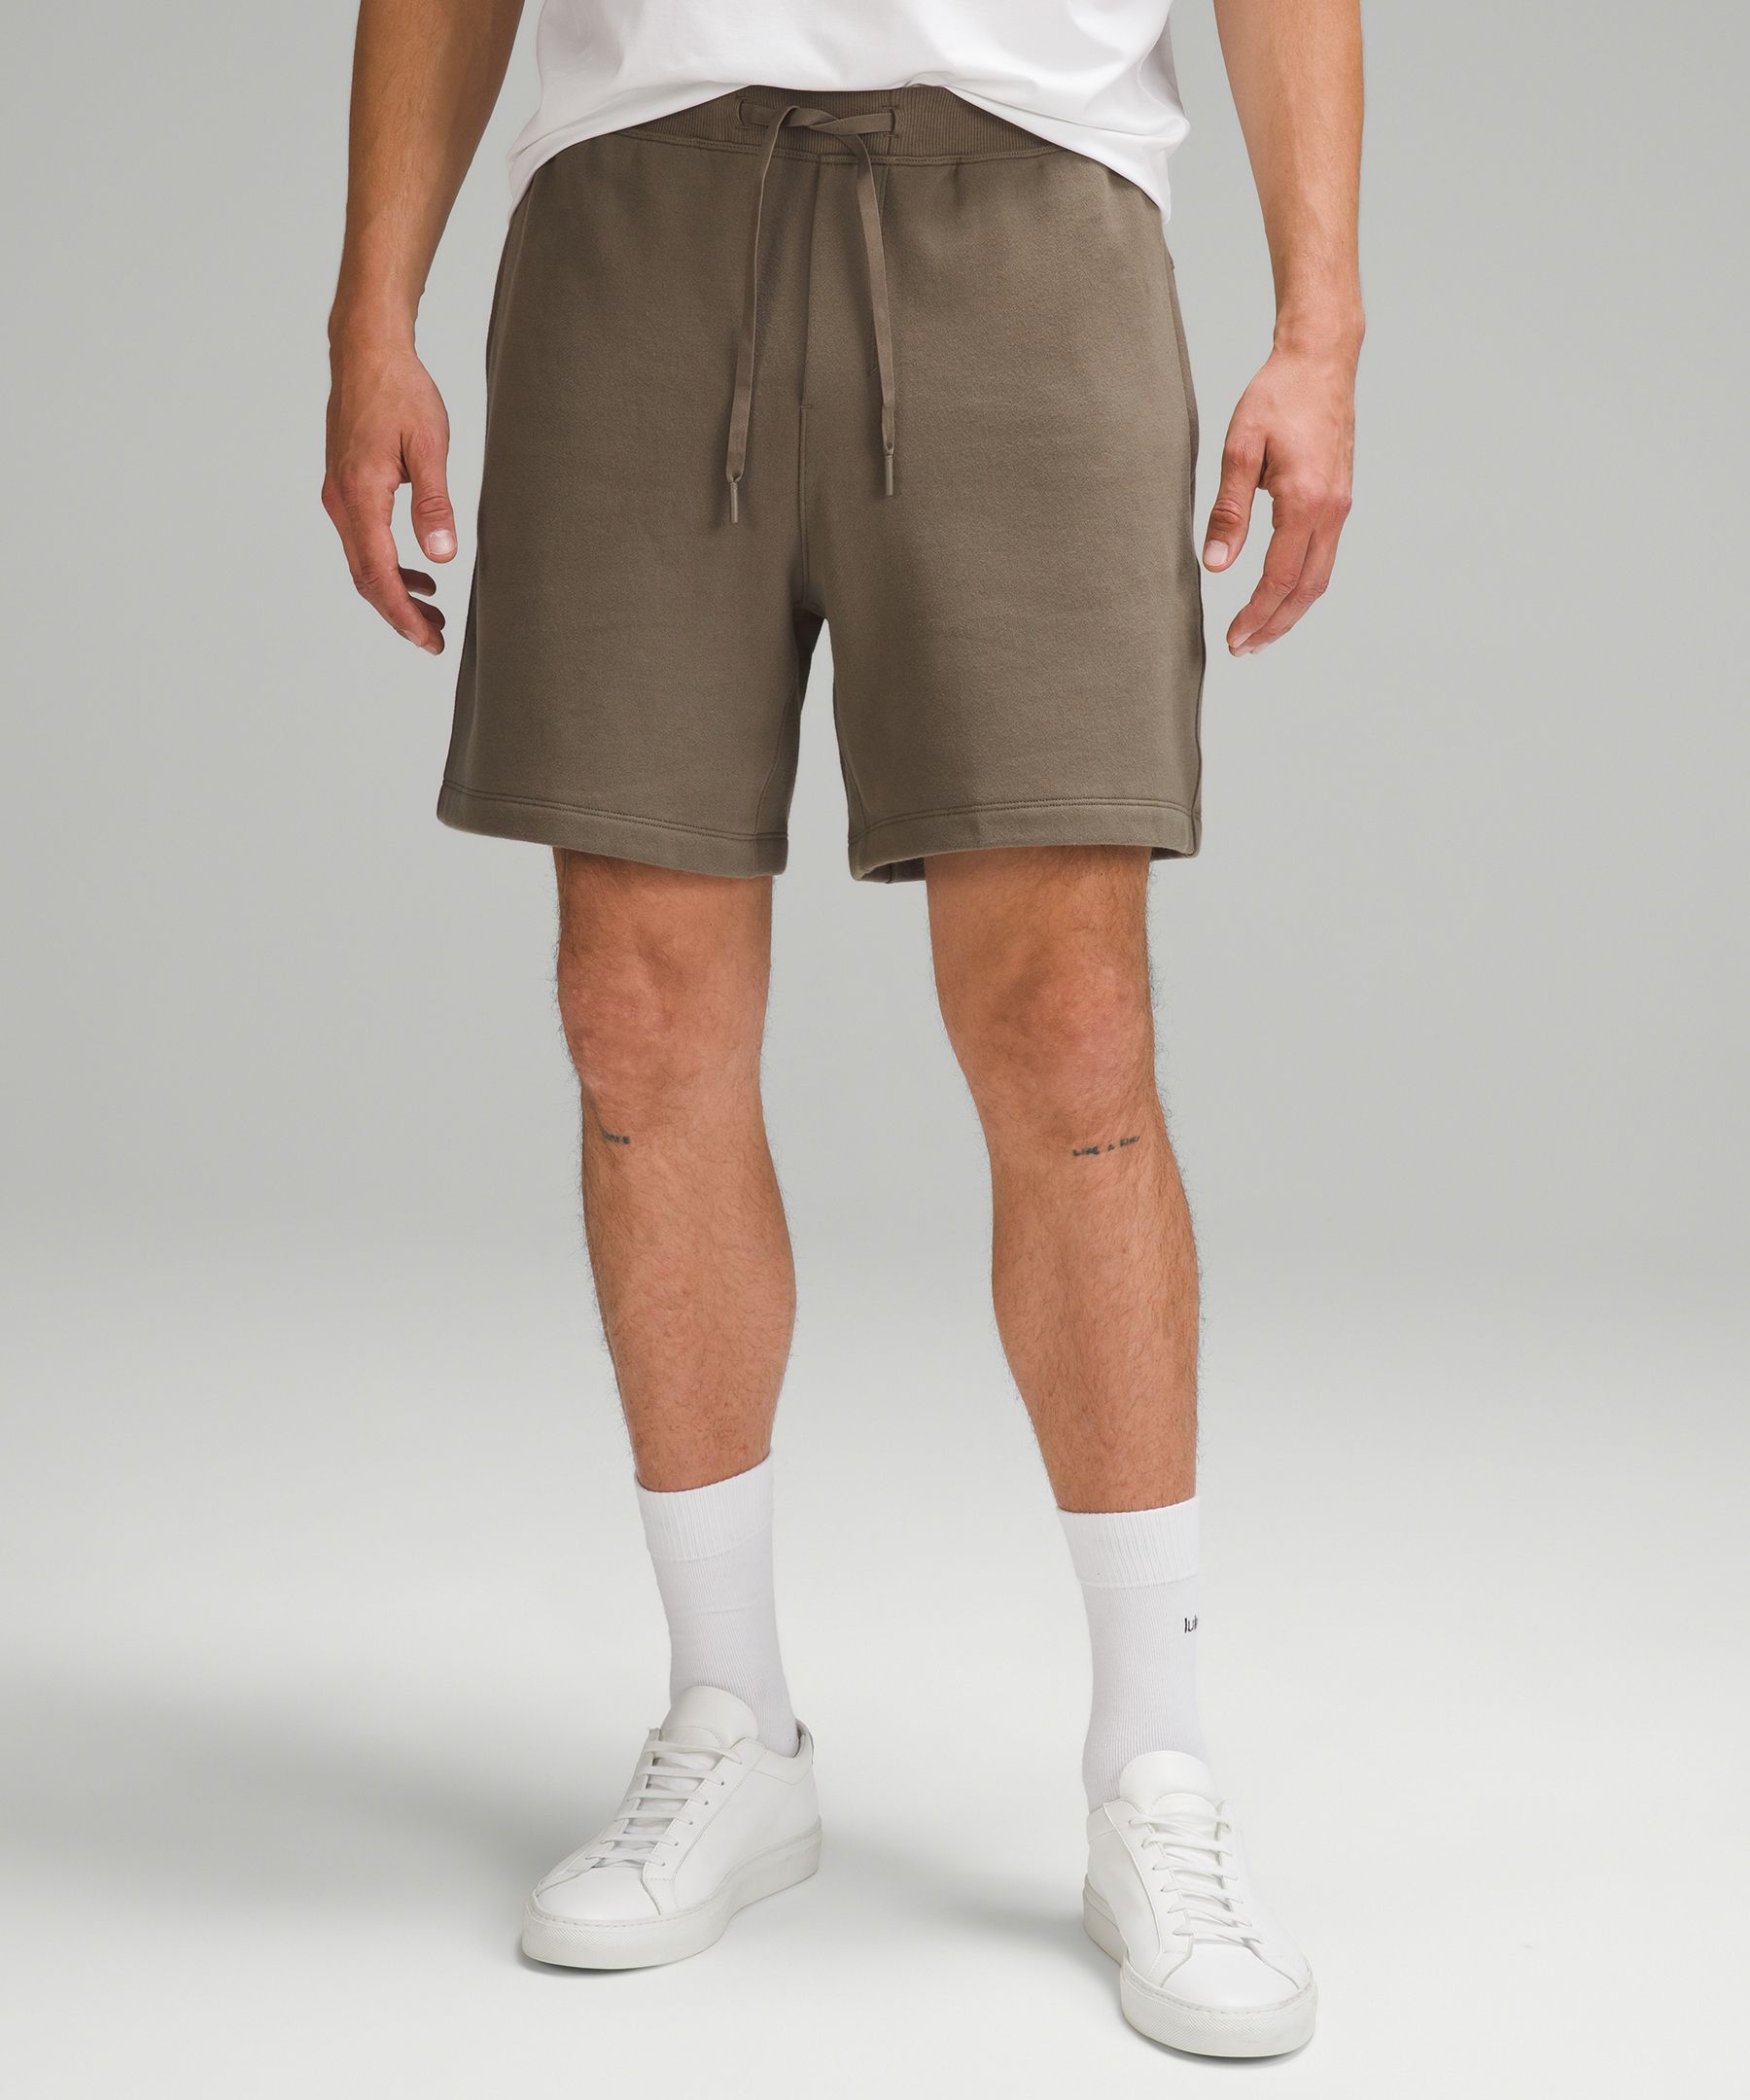 Steady State Pant *Shorter